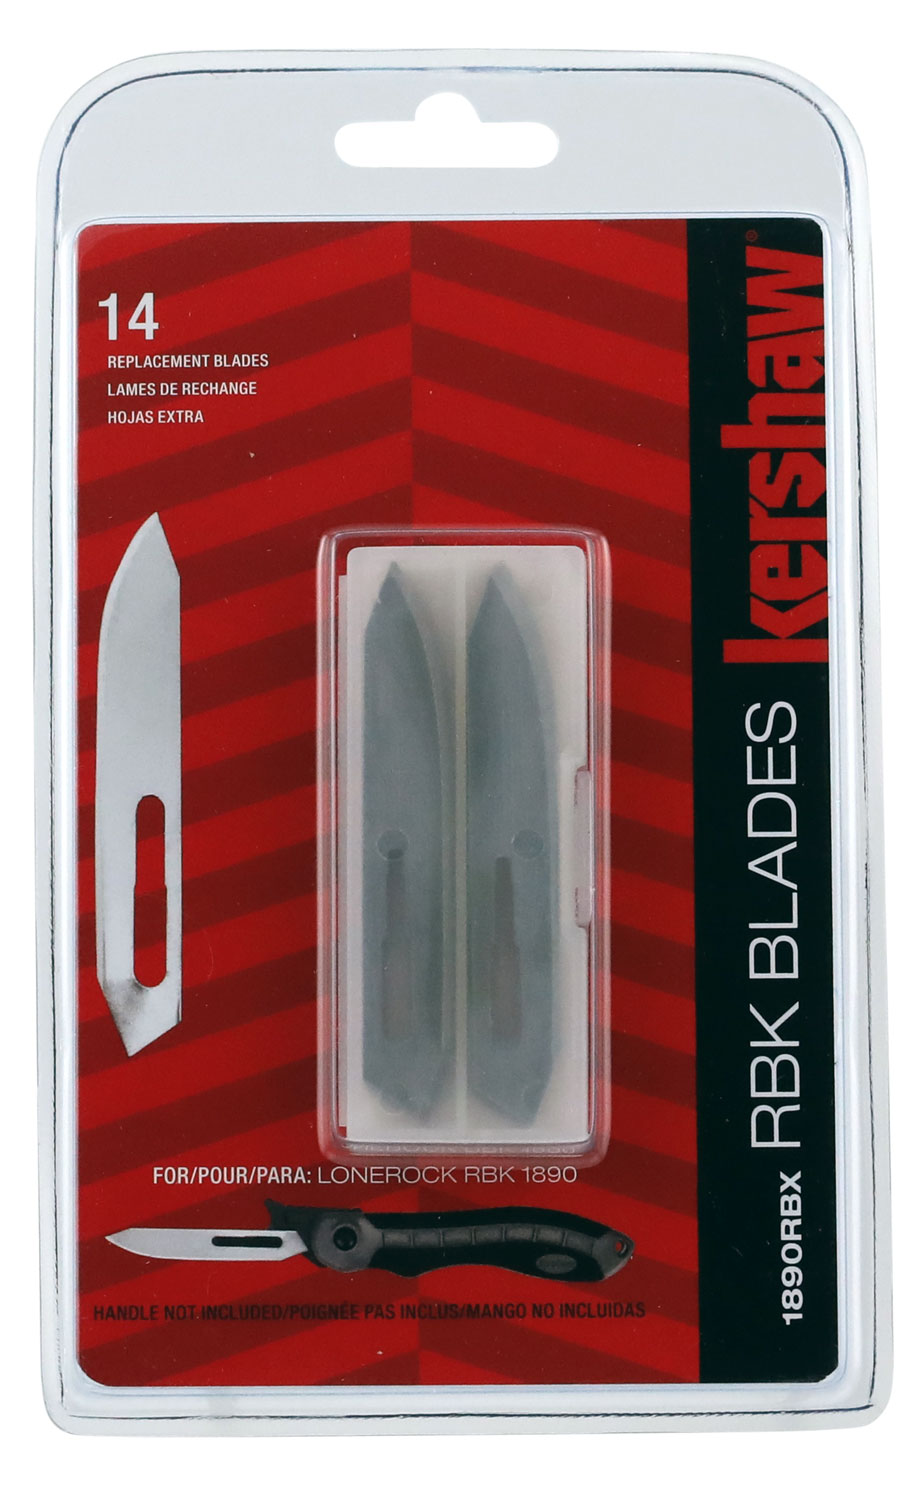 Kershaw 1890RBX Lonerock RBK Replacement Blades, 14 Pack, Clam